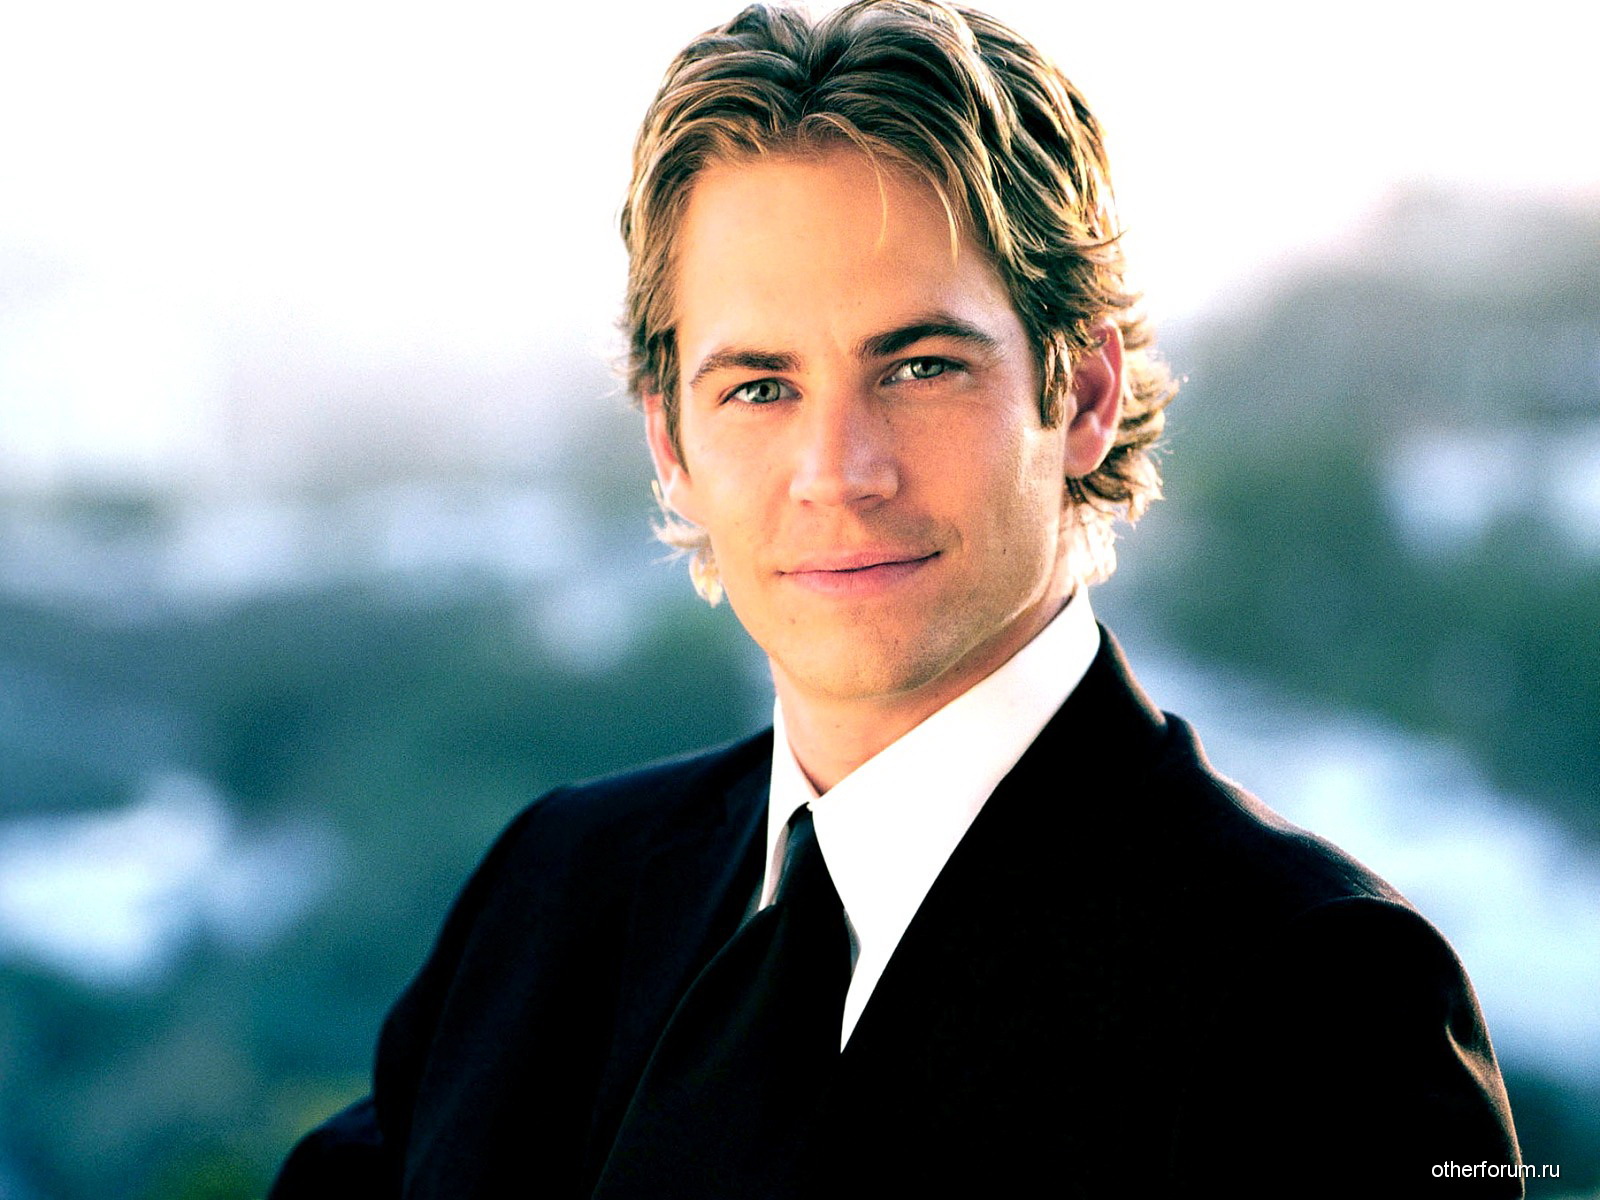 Paul Walker In The Black Suit Wallpaper And Image